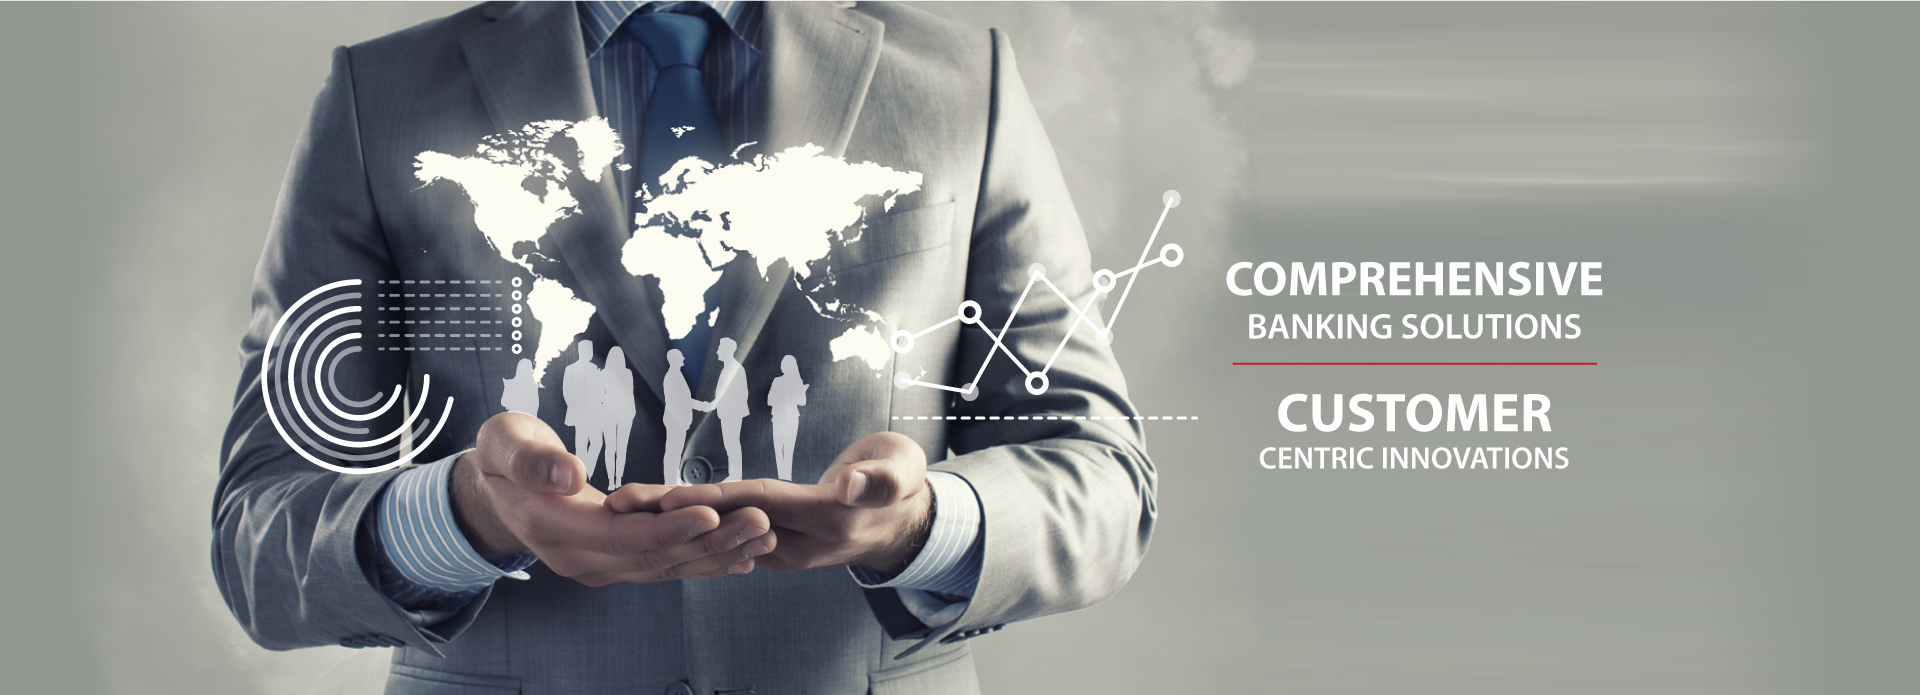 Comprehensive Banking Solutions